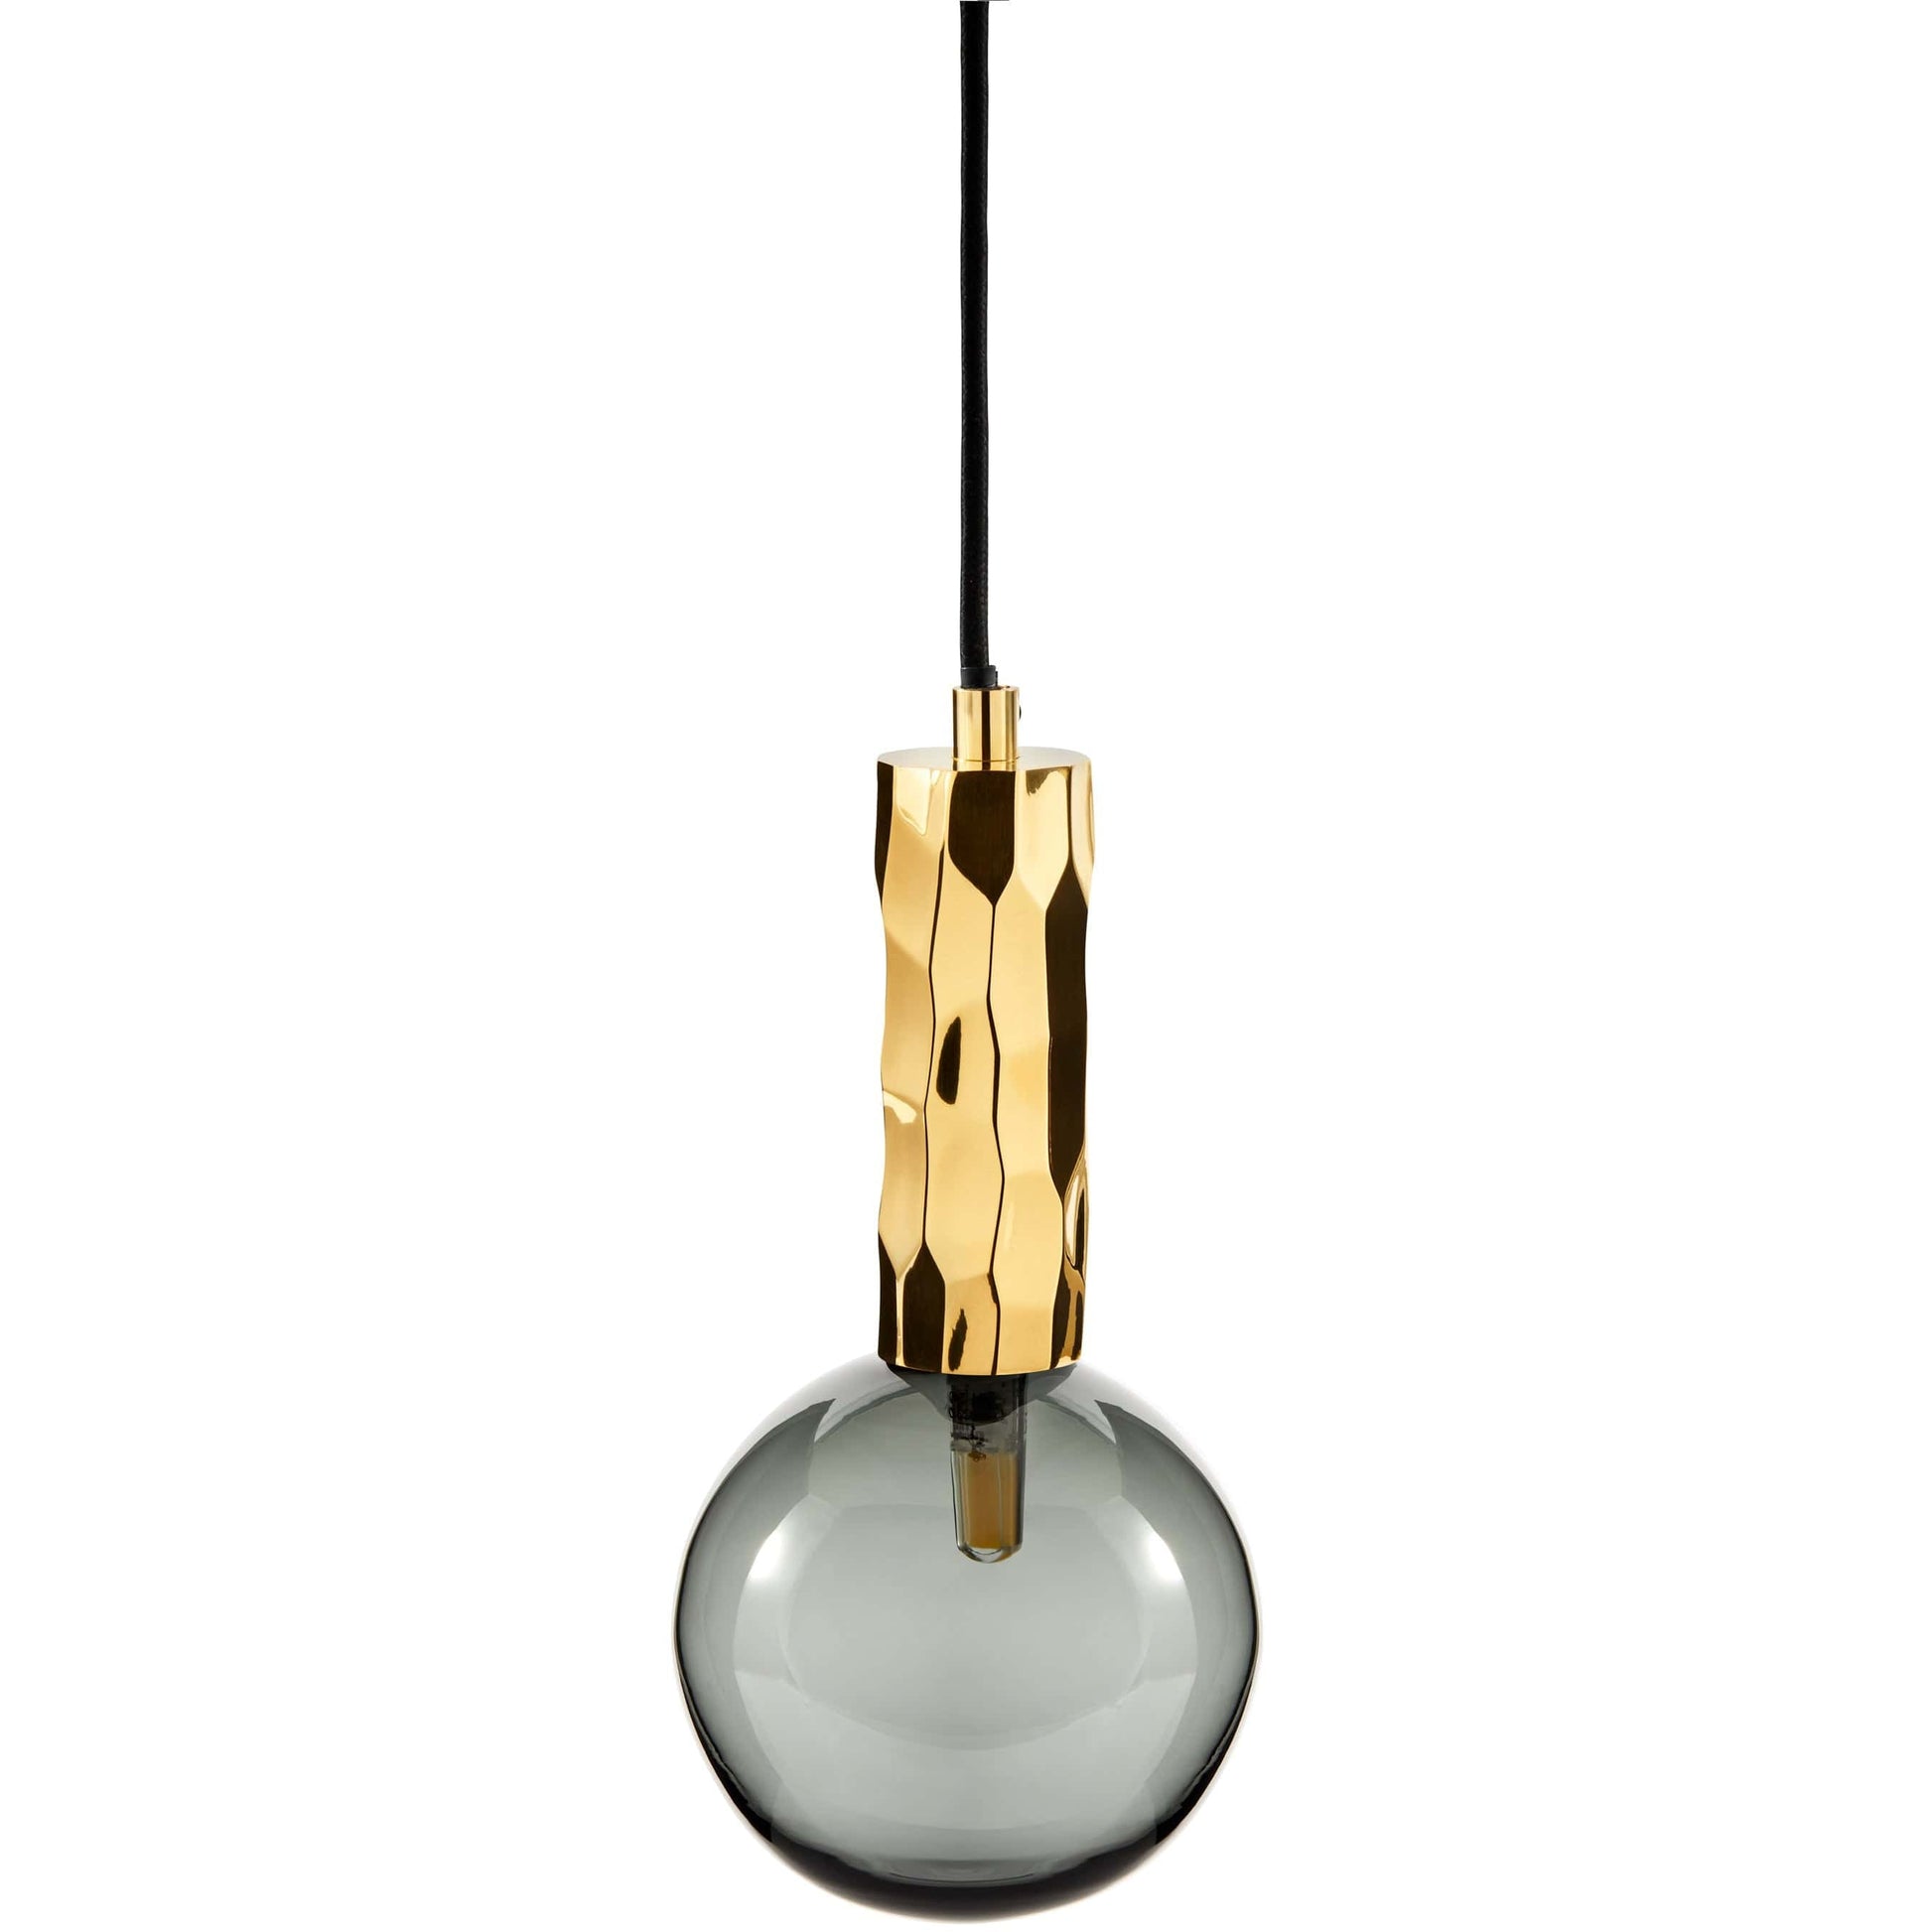 Alex Price Pendant lights Smoked Glass KYOTO Pendant Light Brass with White, Smoked or Clear Glass